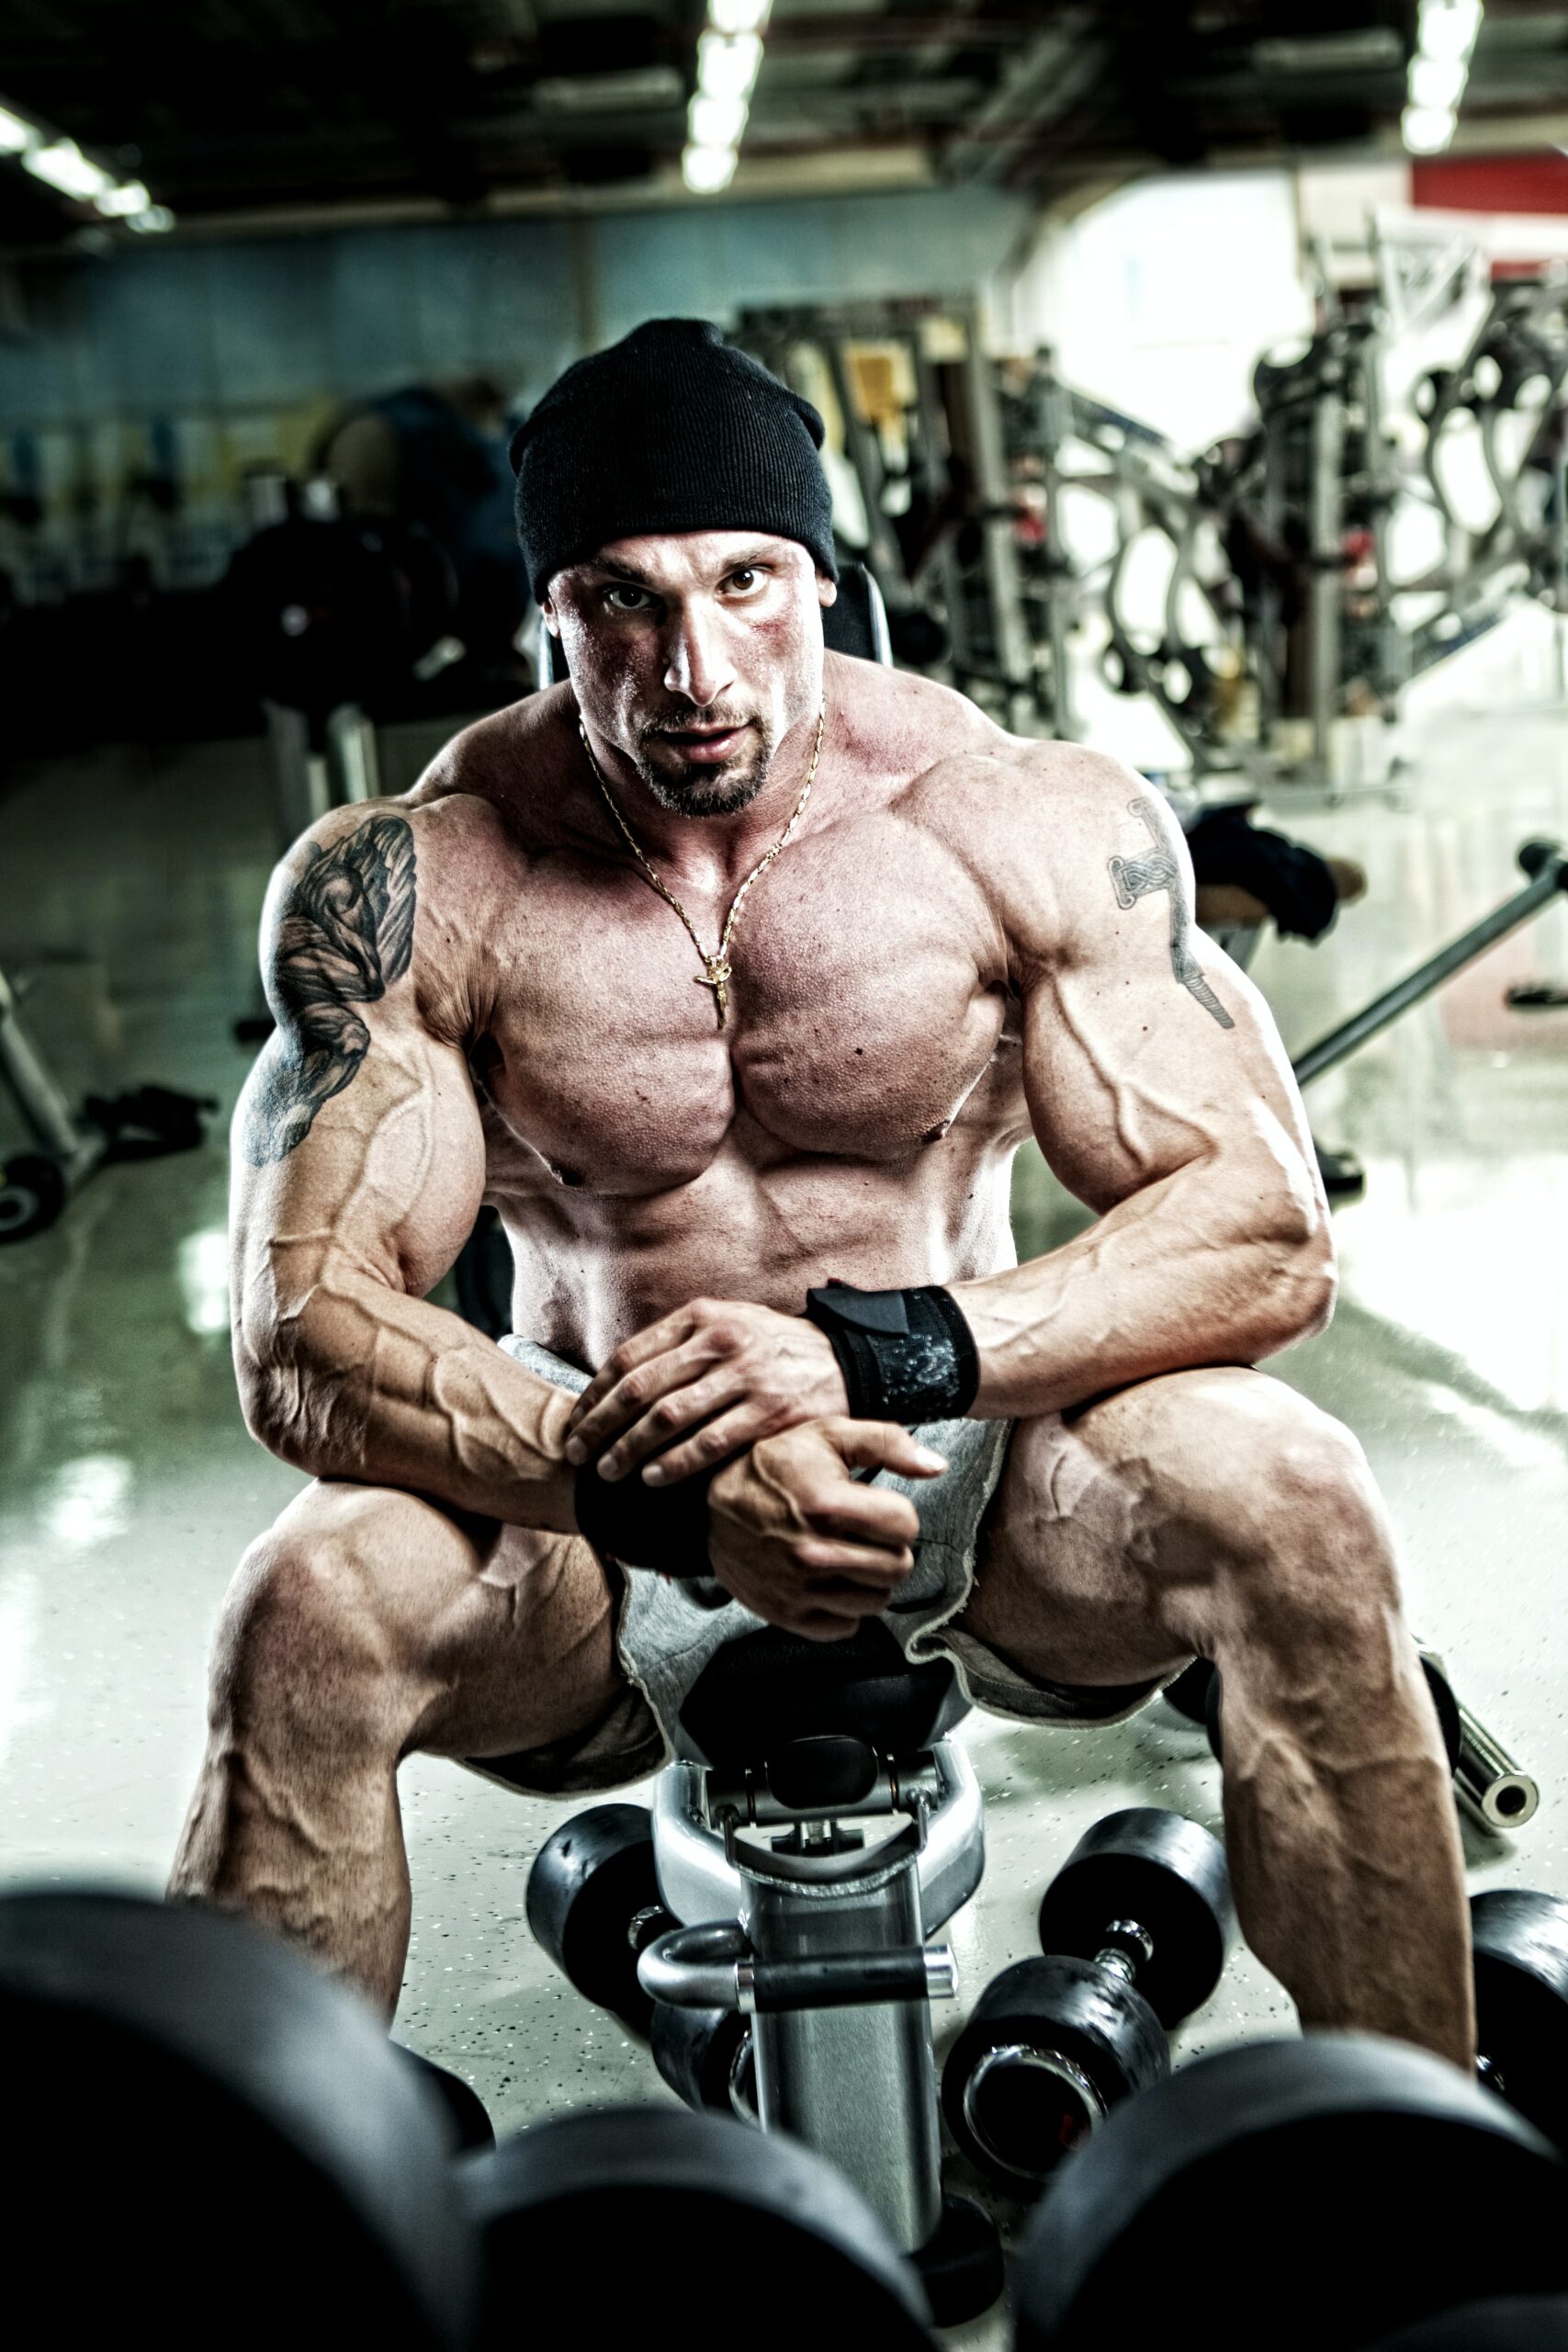 Benefits of Using Natural Anabolic Steroid Alternatives